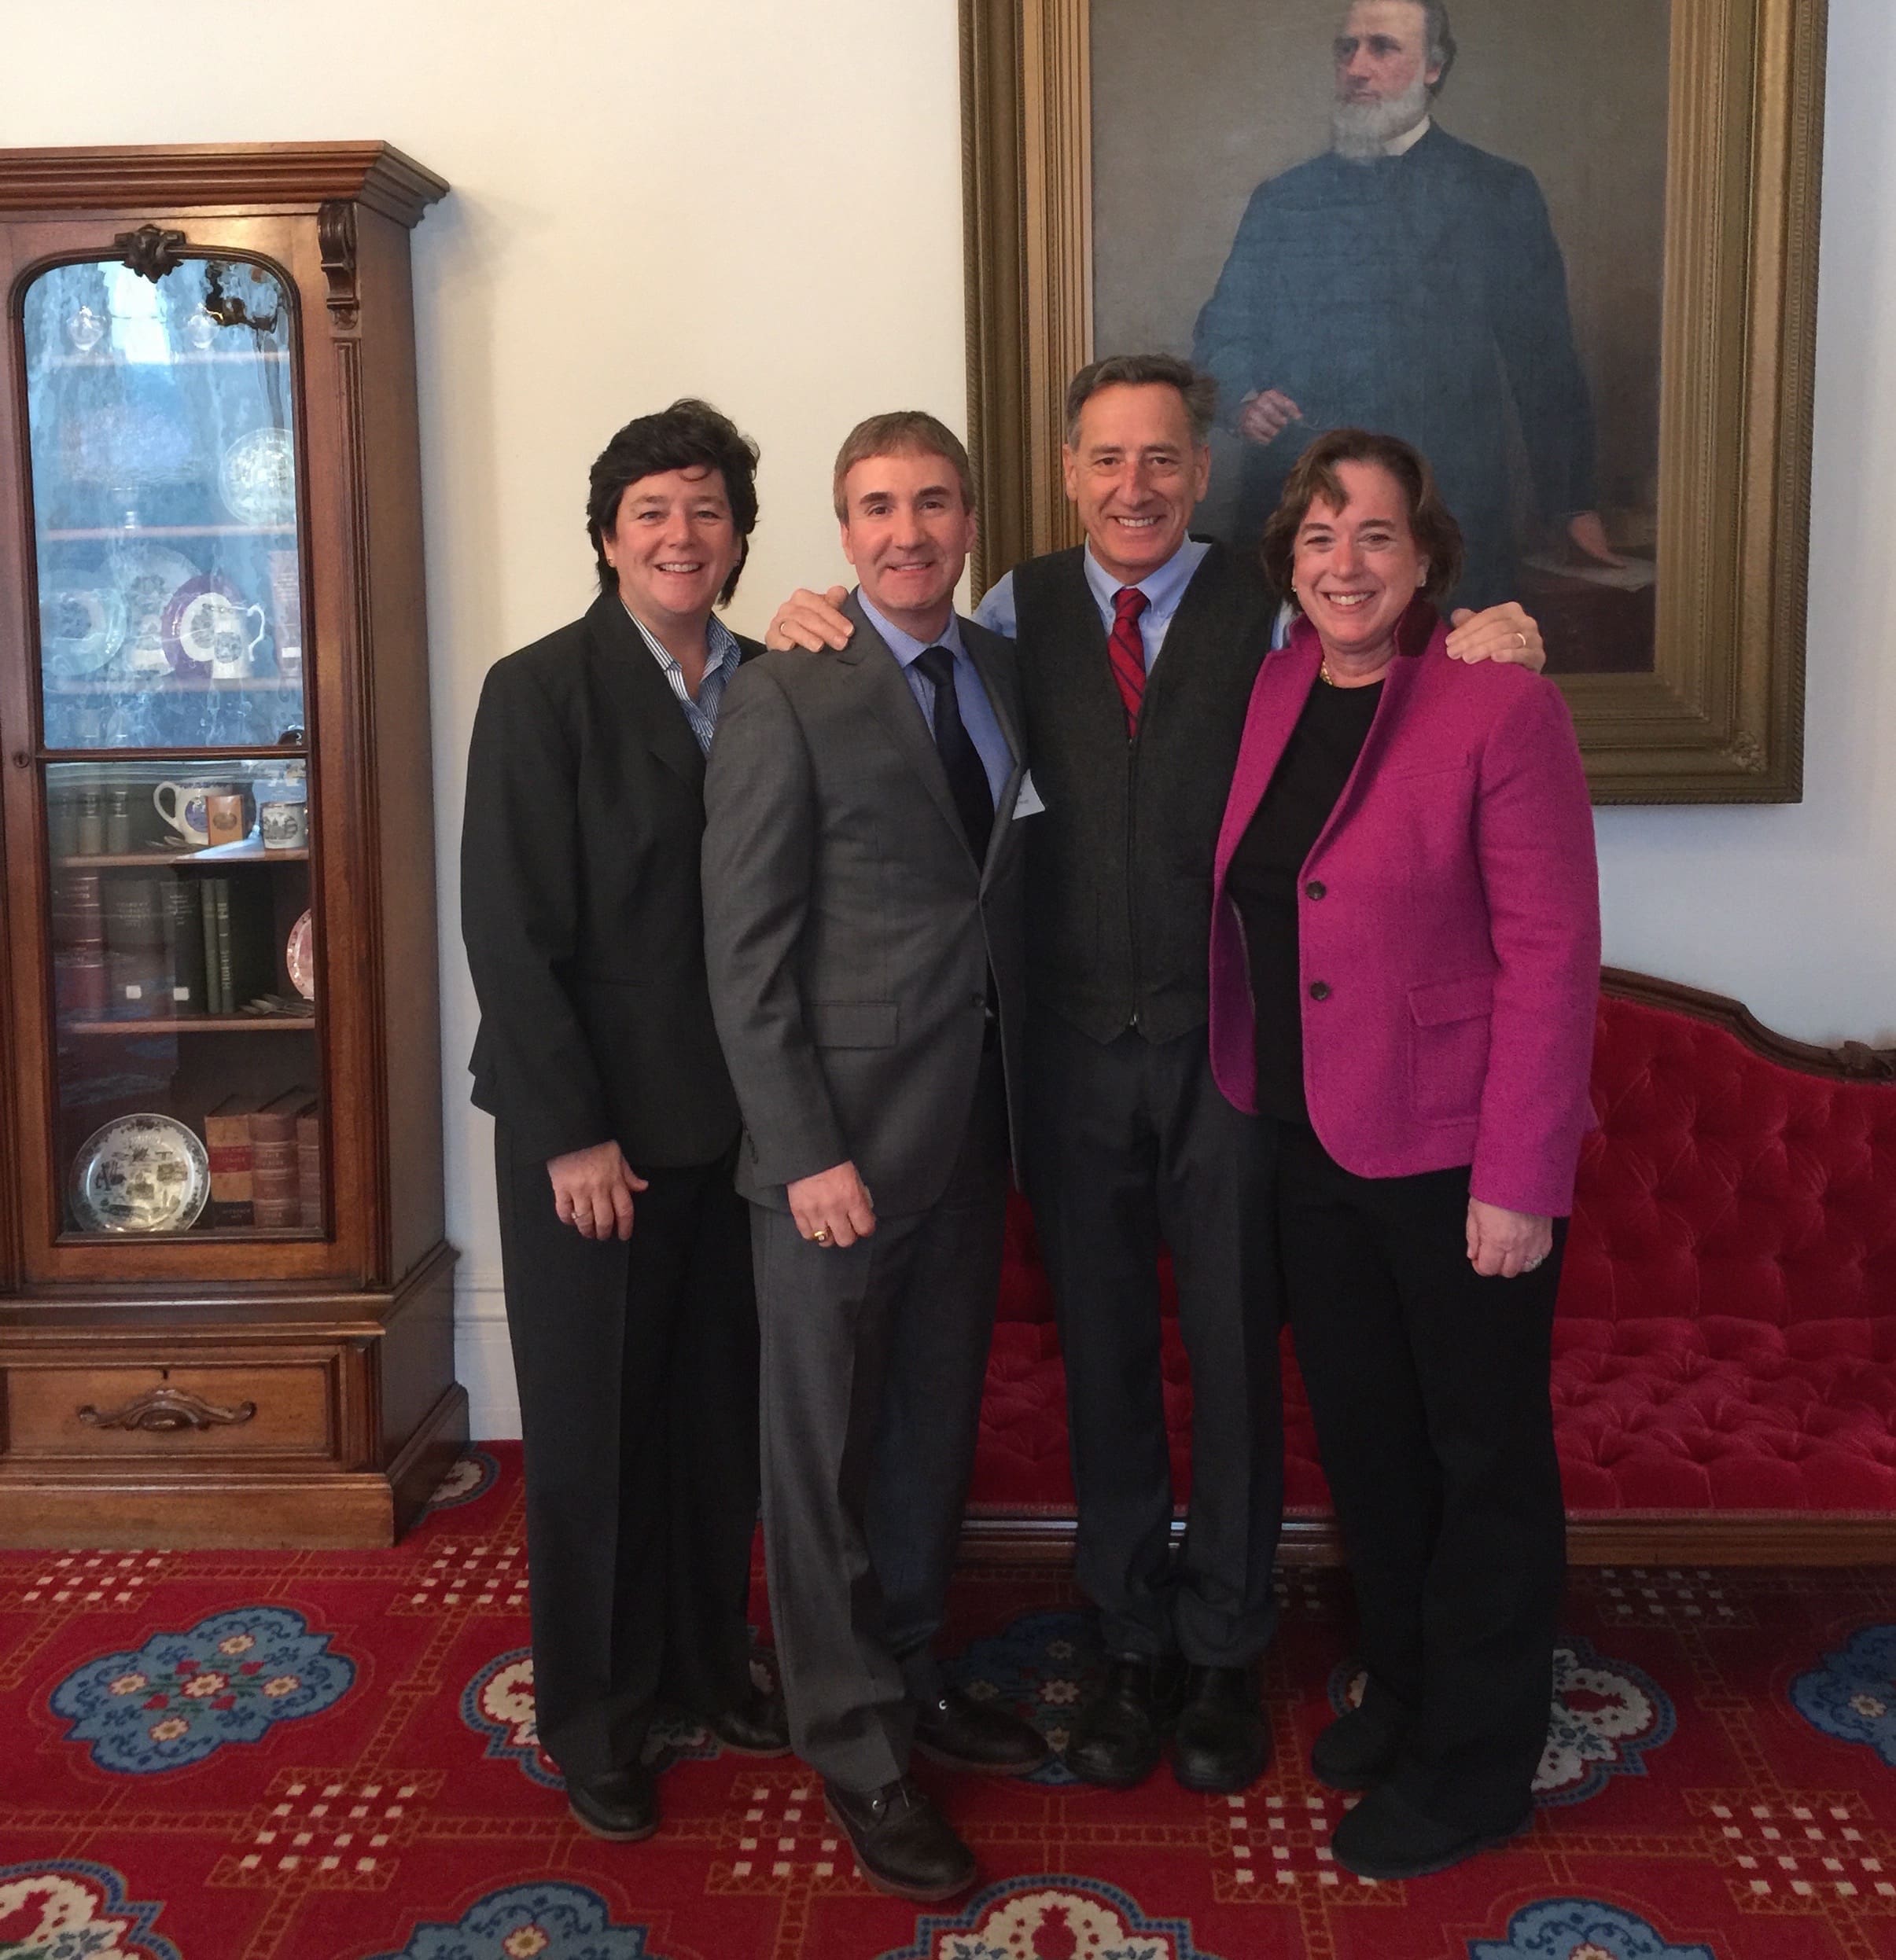 The Vermont Association of Chain Drug Stores' Heather Shouldice, Kinney Drugs' Mike Duteau, R.Ph., chair of the NACDS Policy Council, and NACDS' Anne Fellows met with Vermont Governor Peter Schumlin (D-VT)